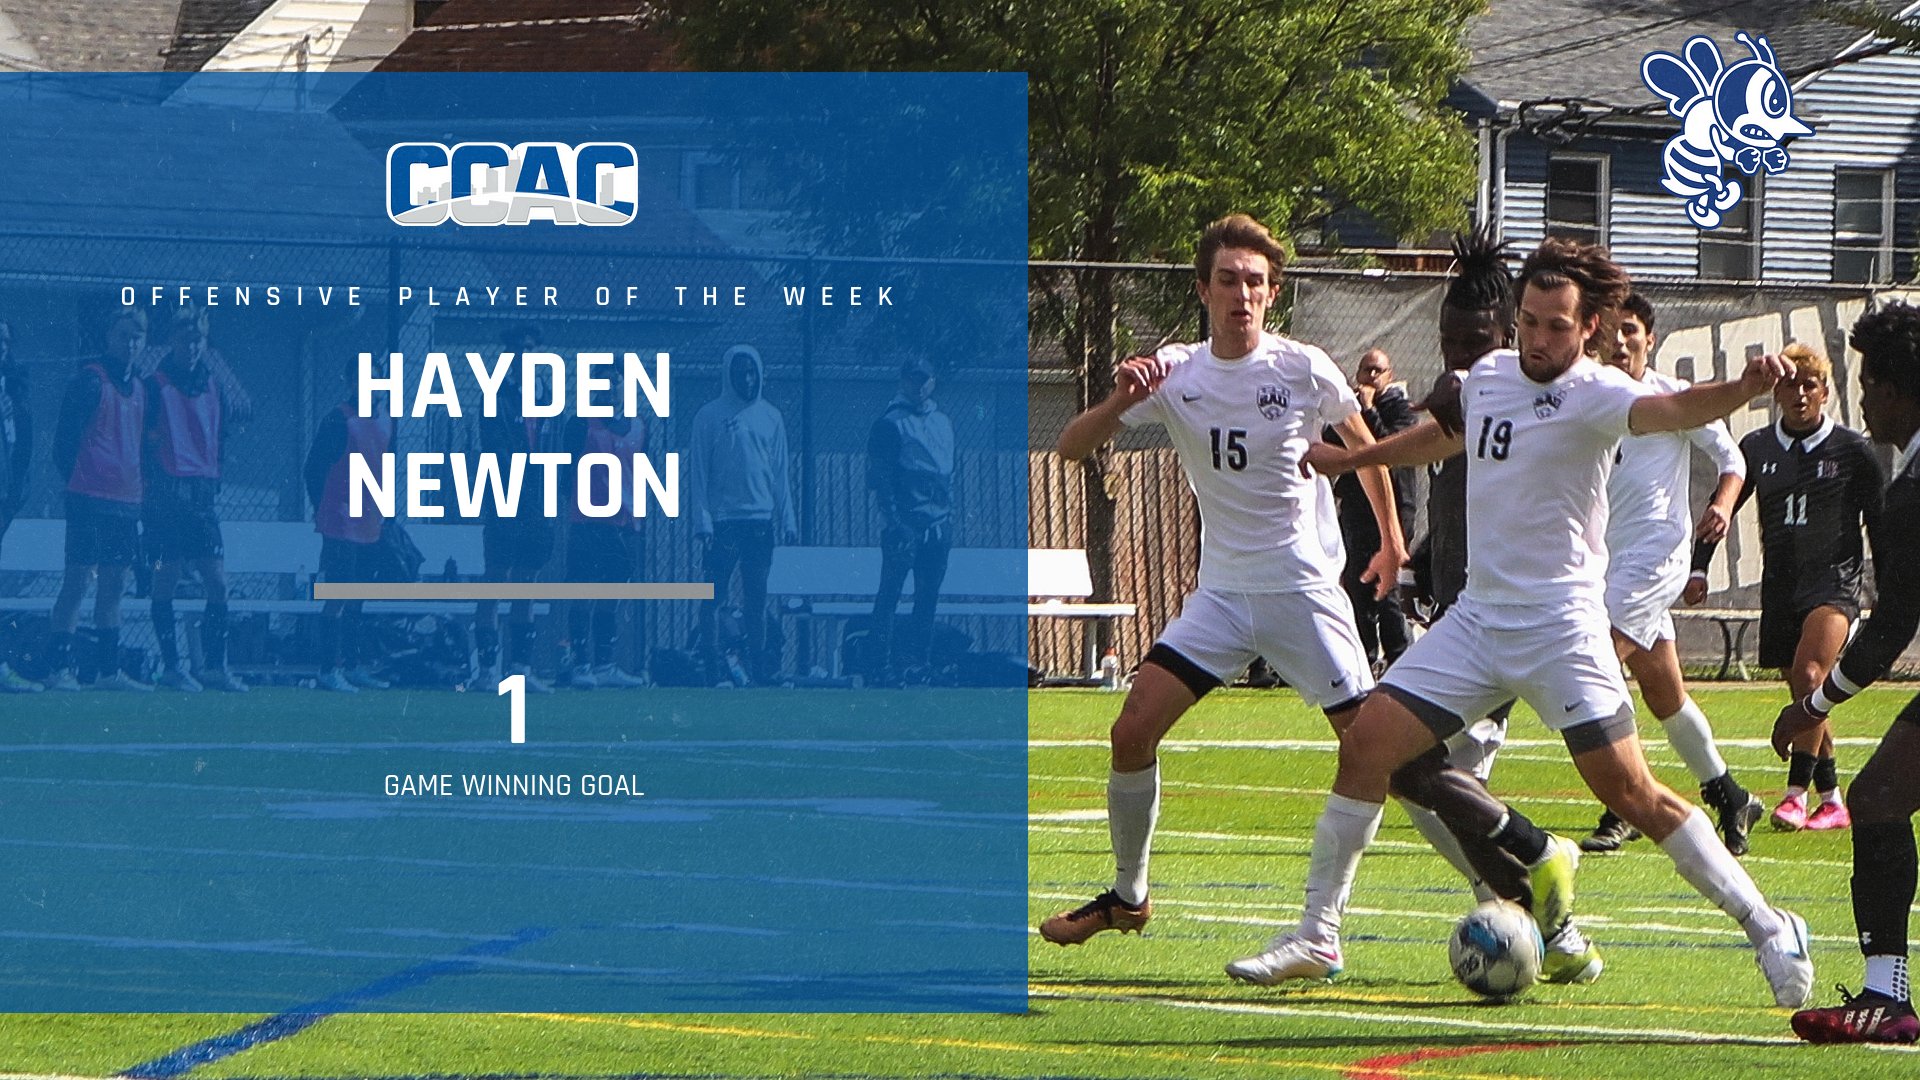 Newton named Player of the Week